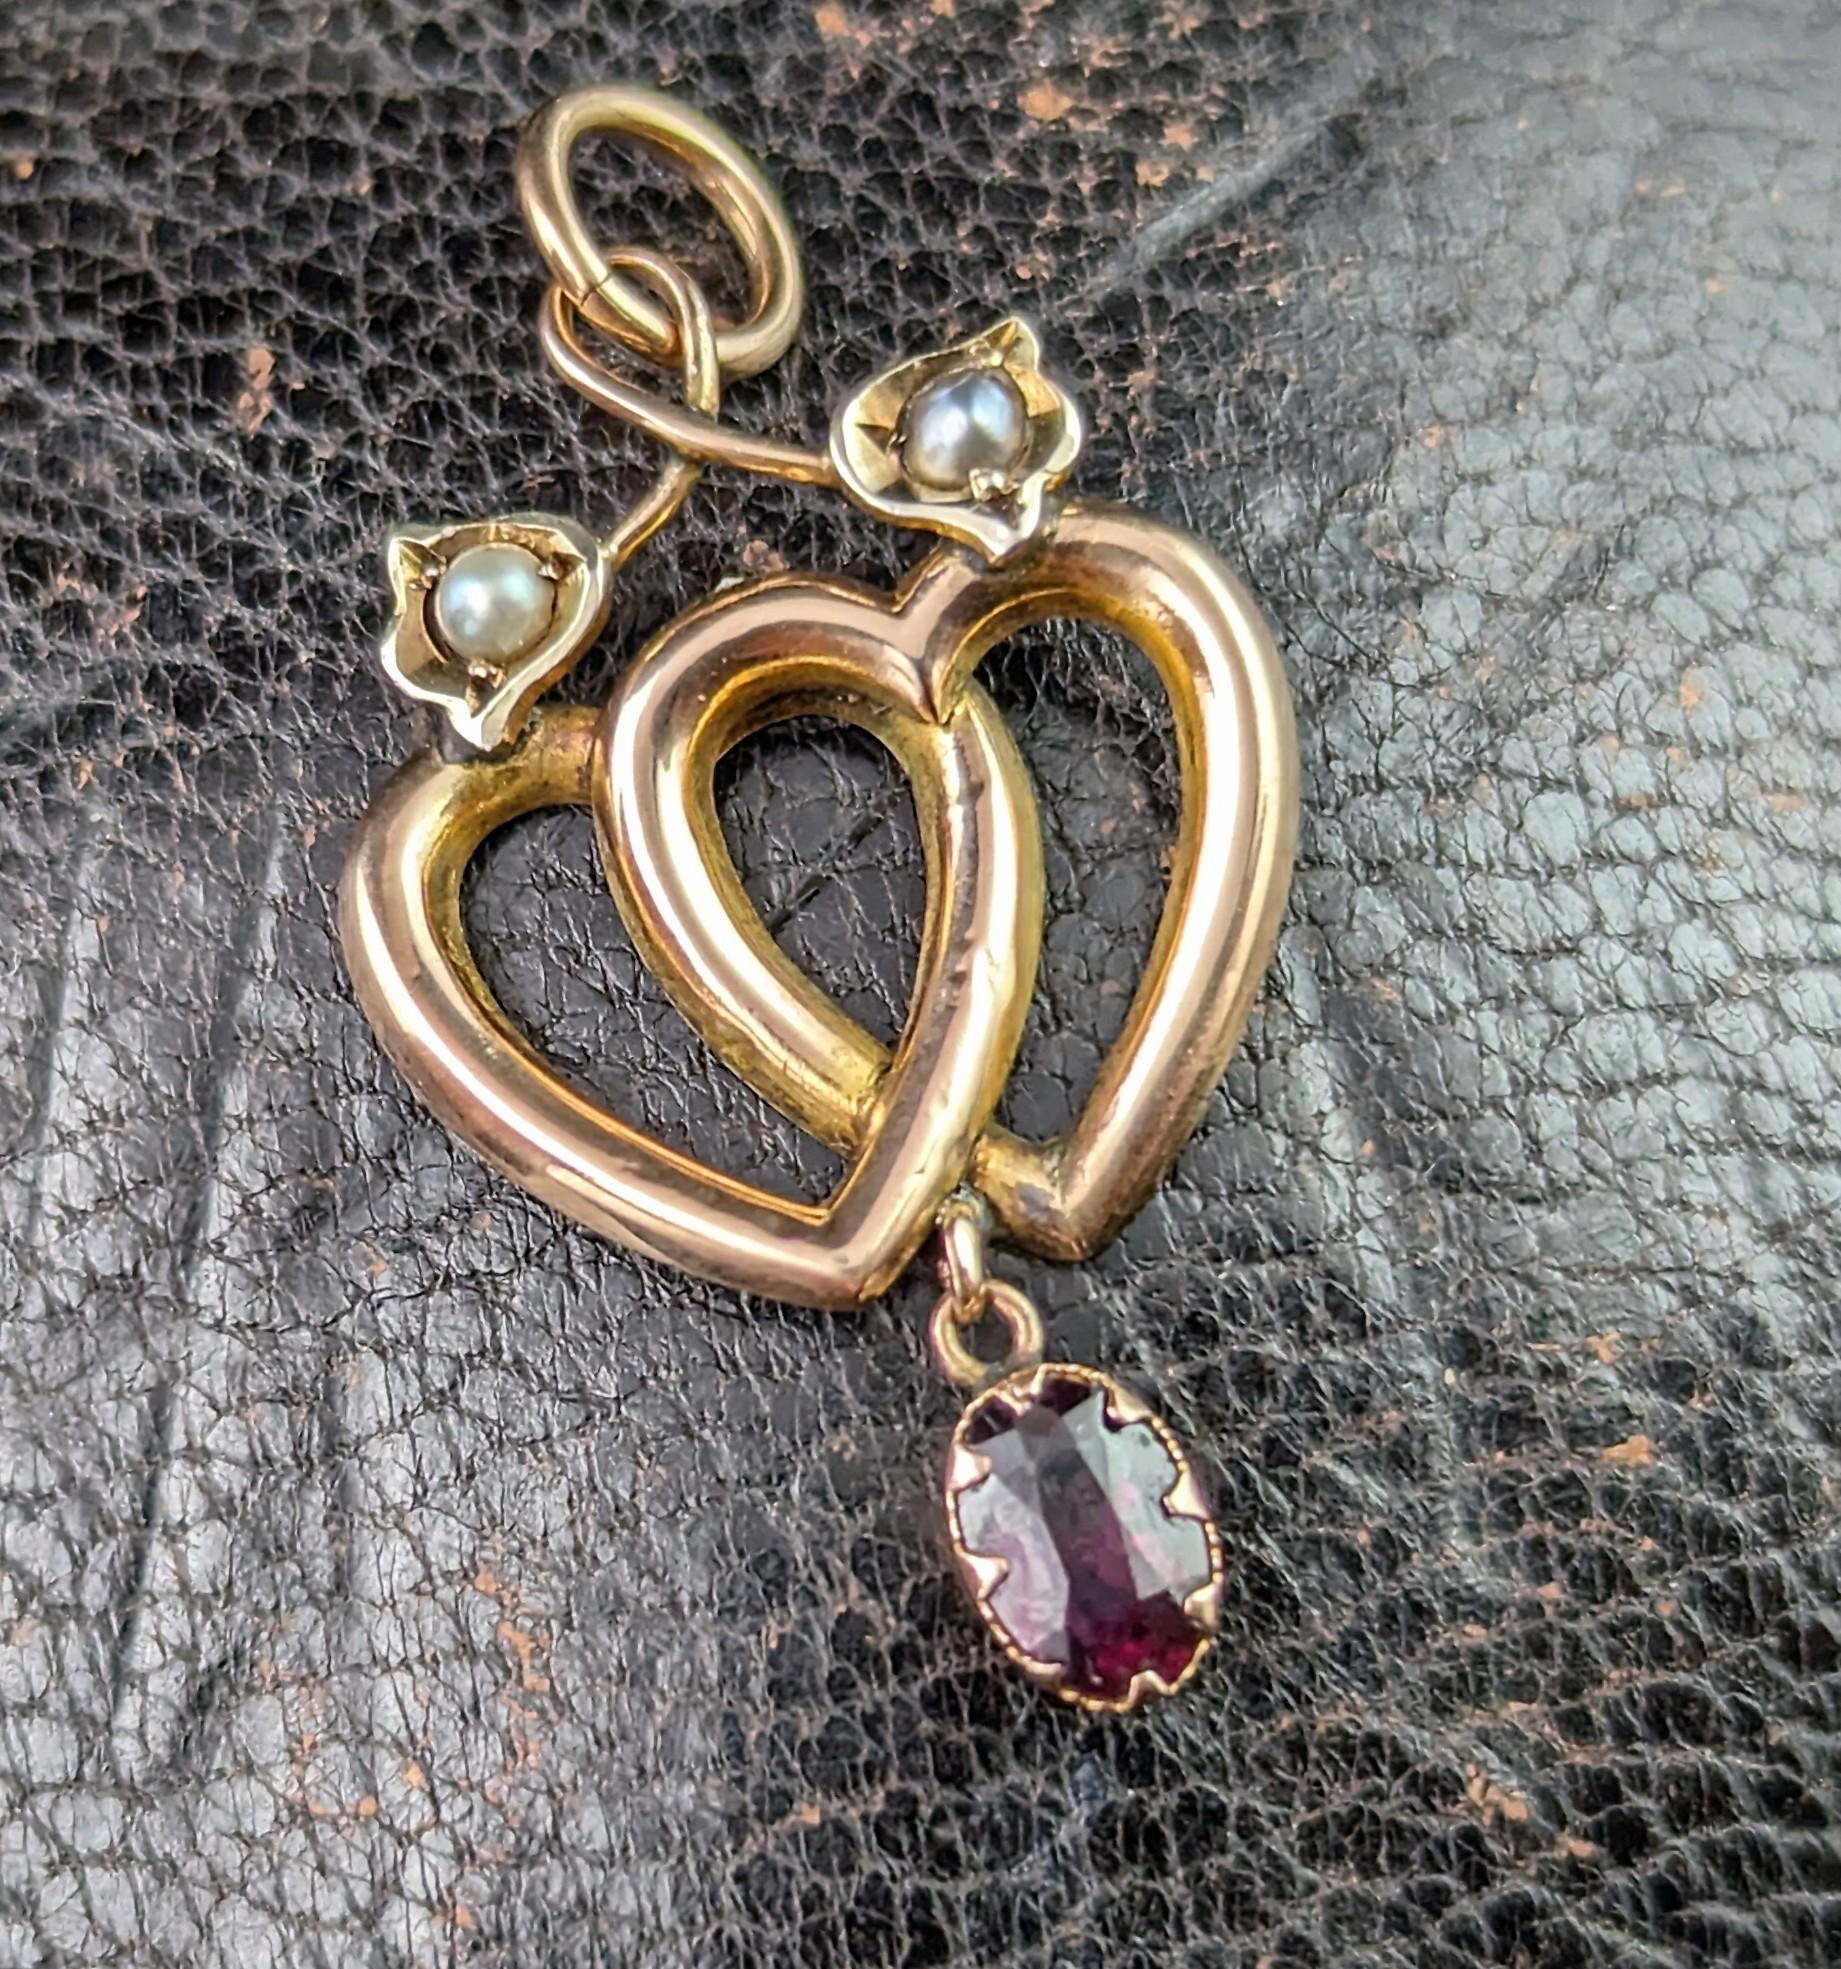 The sweetest little antique double heart dropper pendant.

Crafted in 9ct gold with rosey tones it features double entwined hearts each with a pretty tulip flower to the top twirling around the curve of the heart and set with a tiny seed pearl.

The